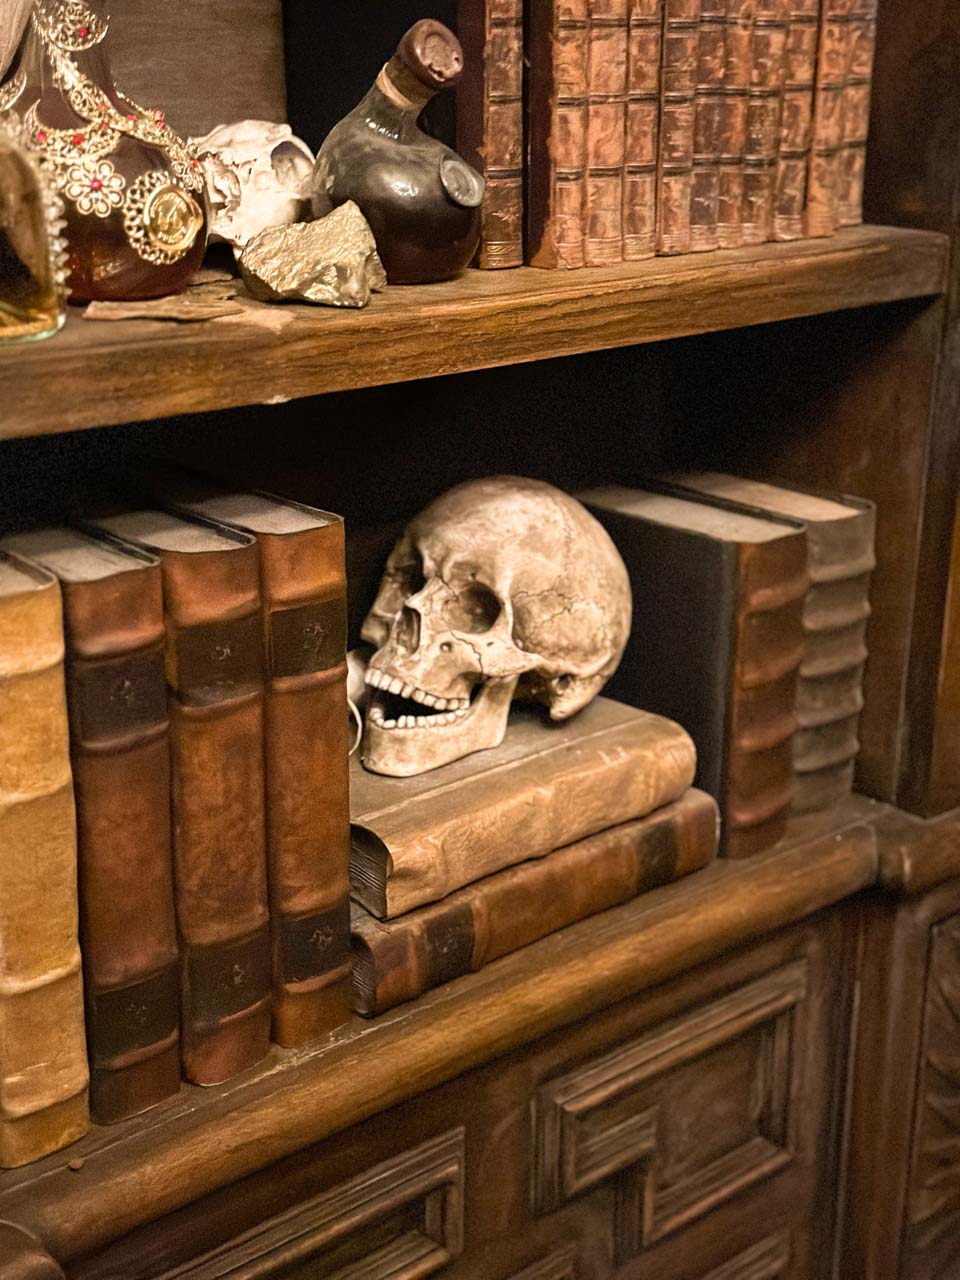 Books and a human skull on a bookshelf at Speculum Alchemiae in Prague